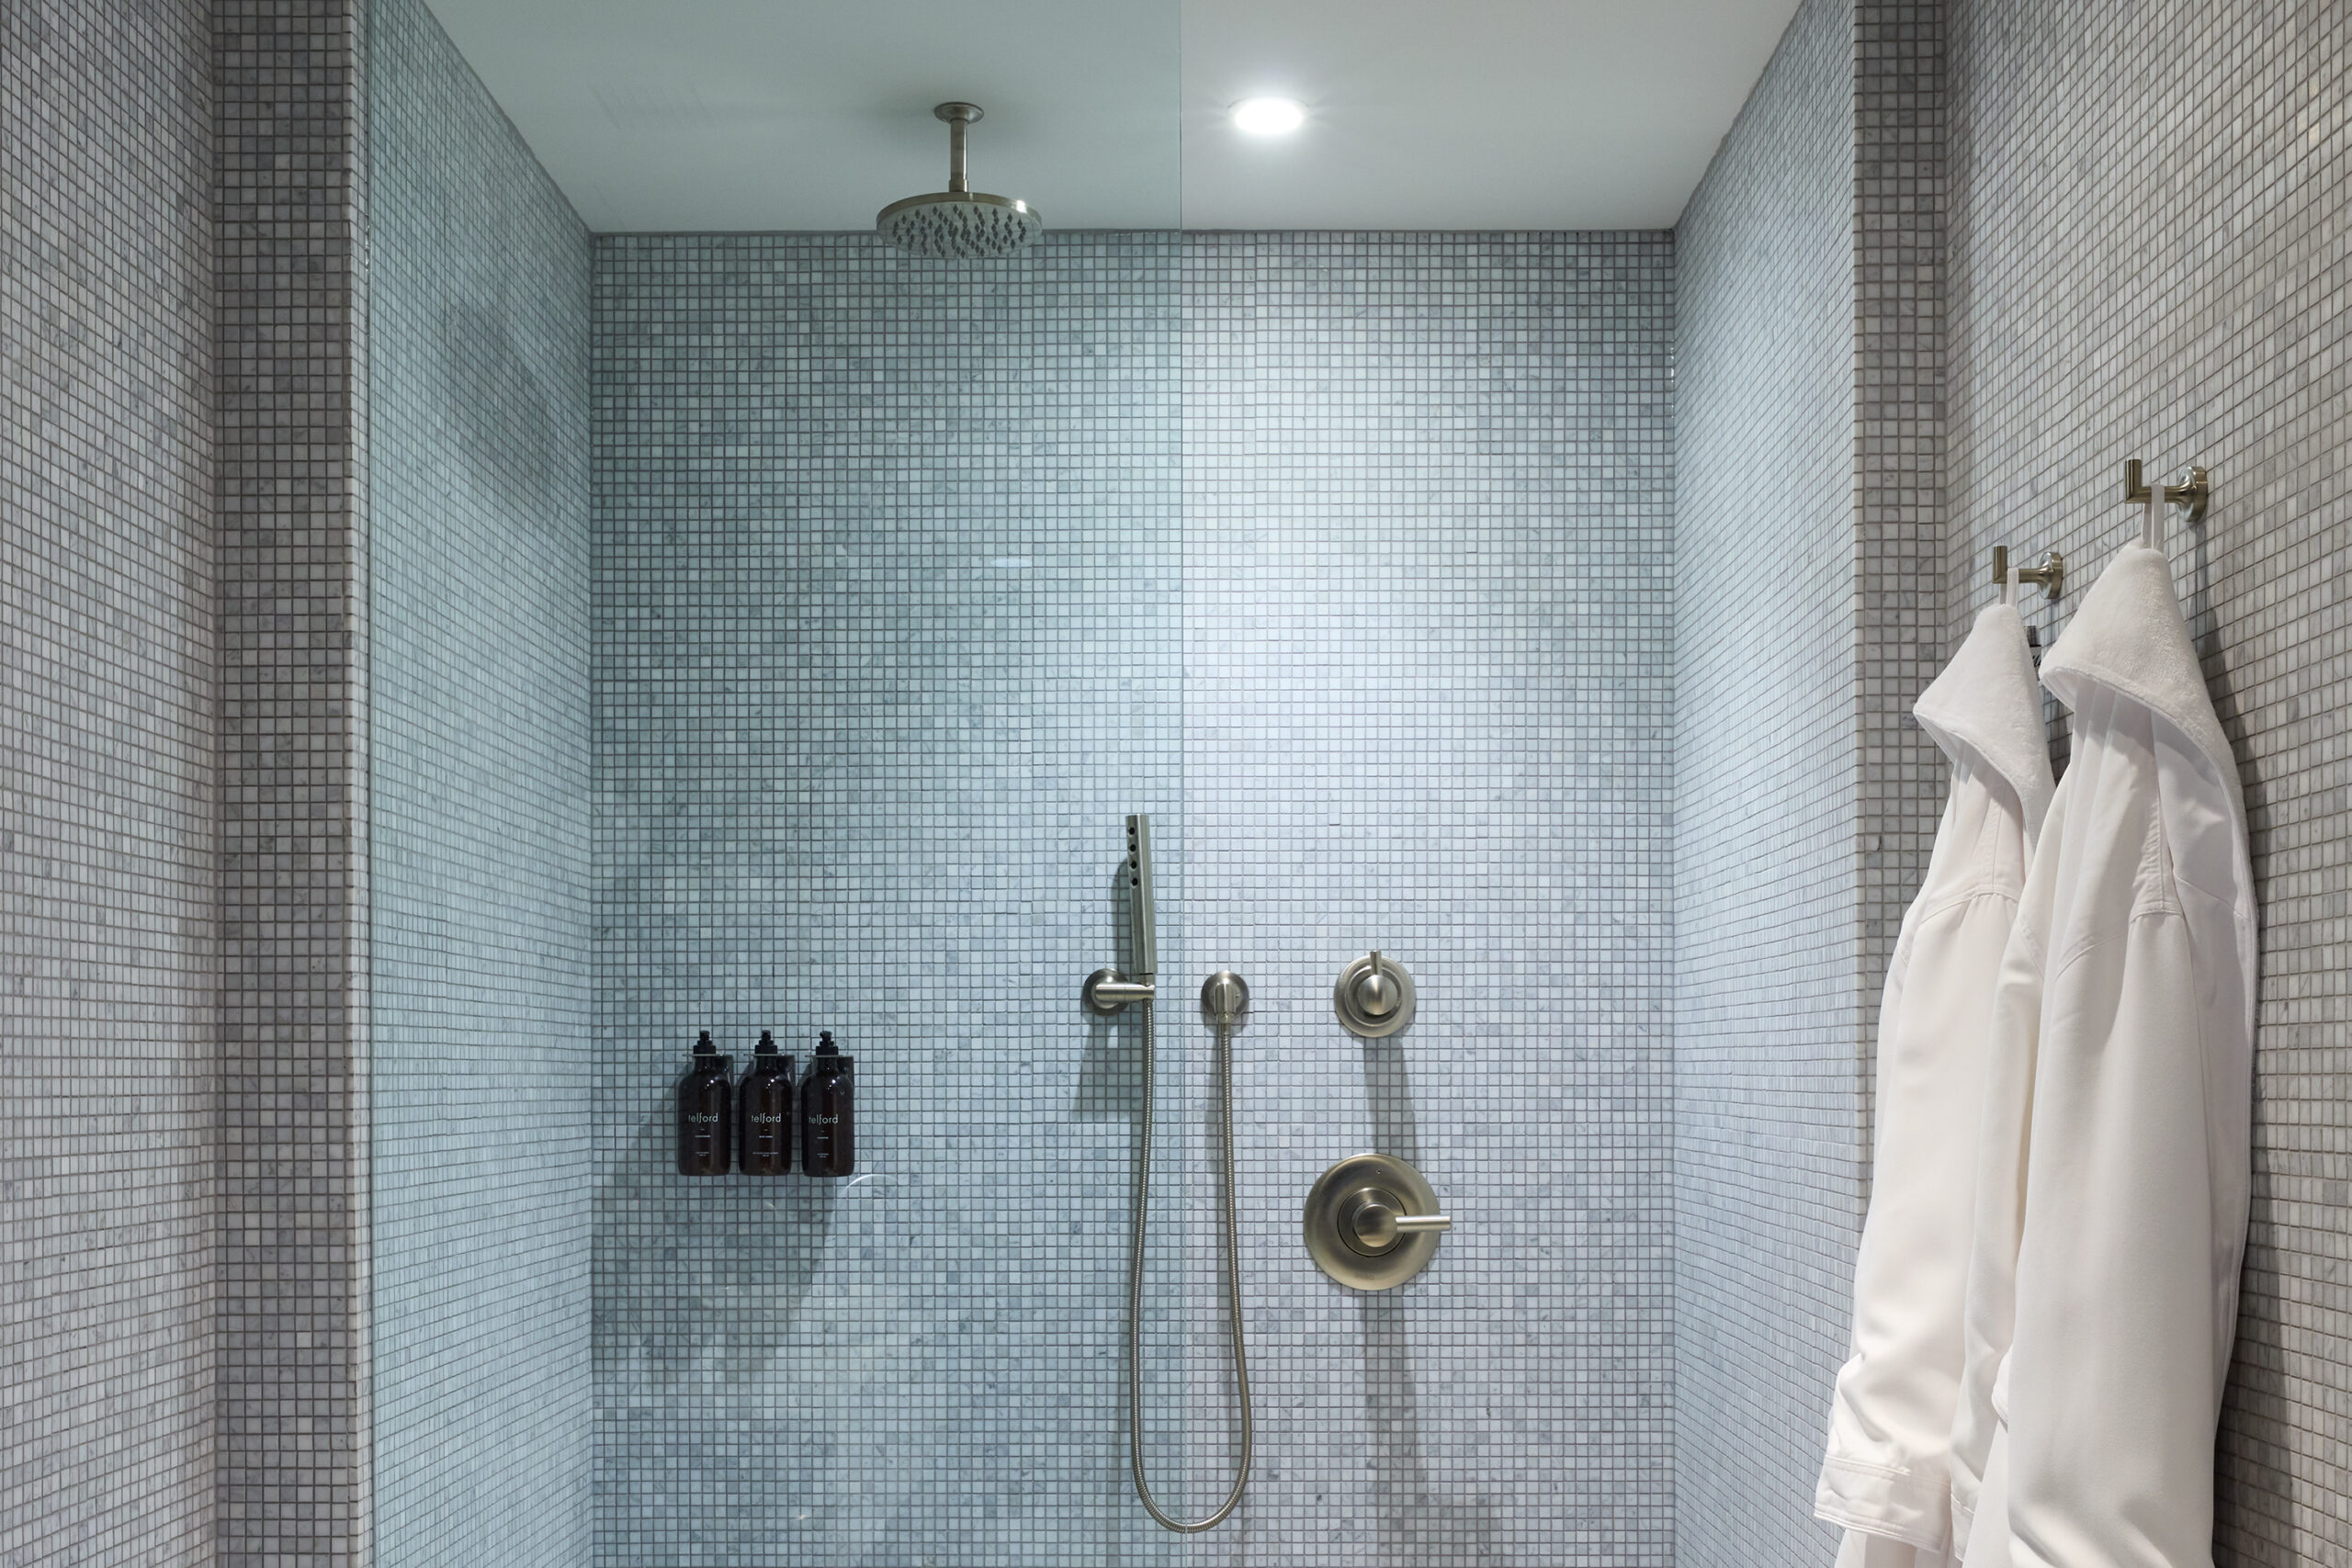 Brightly lit bathroom tiled from floor to ceiling with two white robes